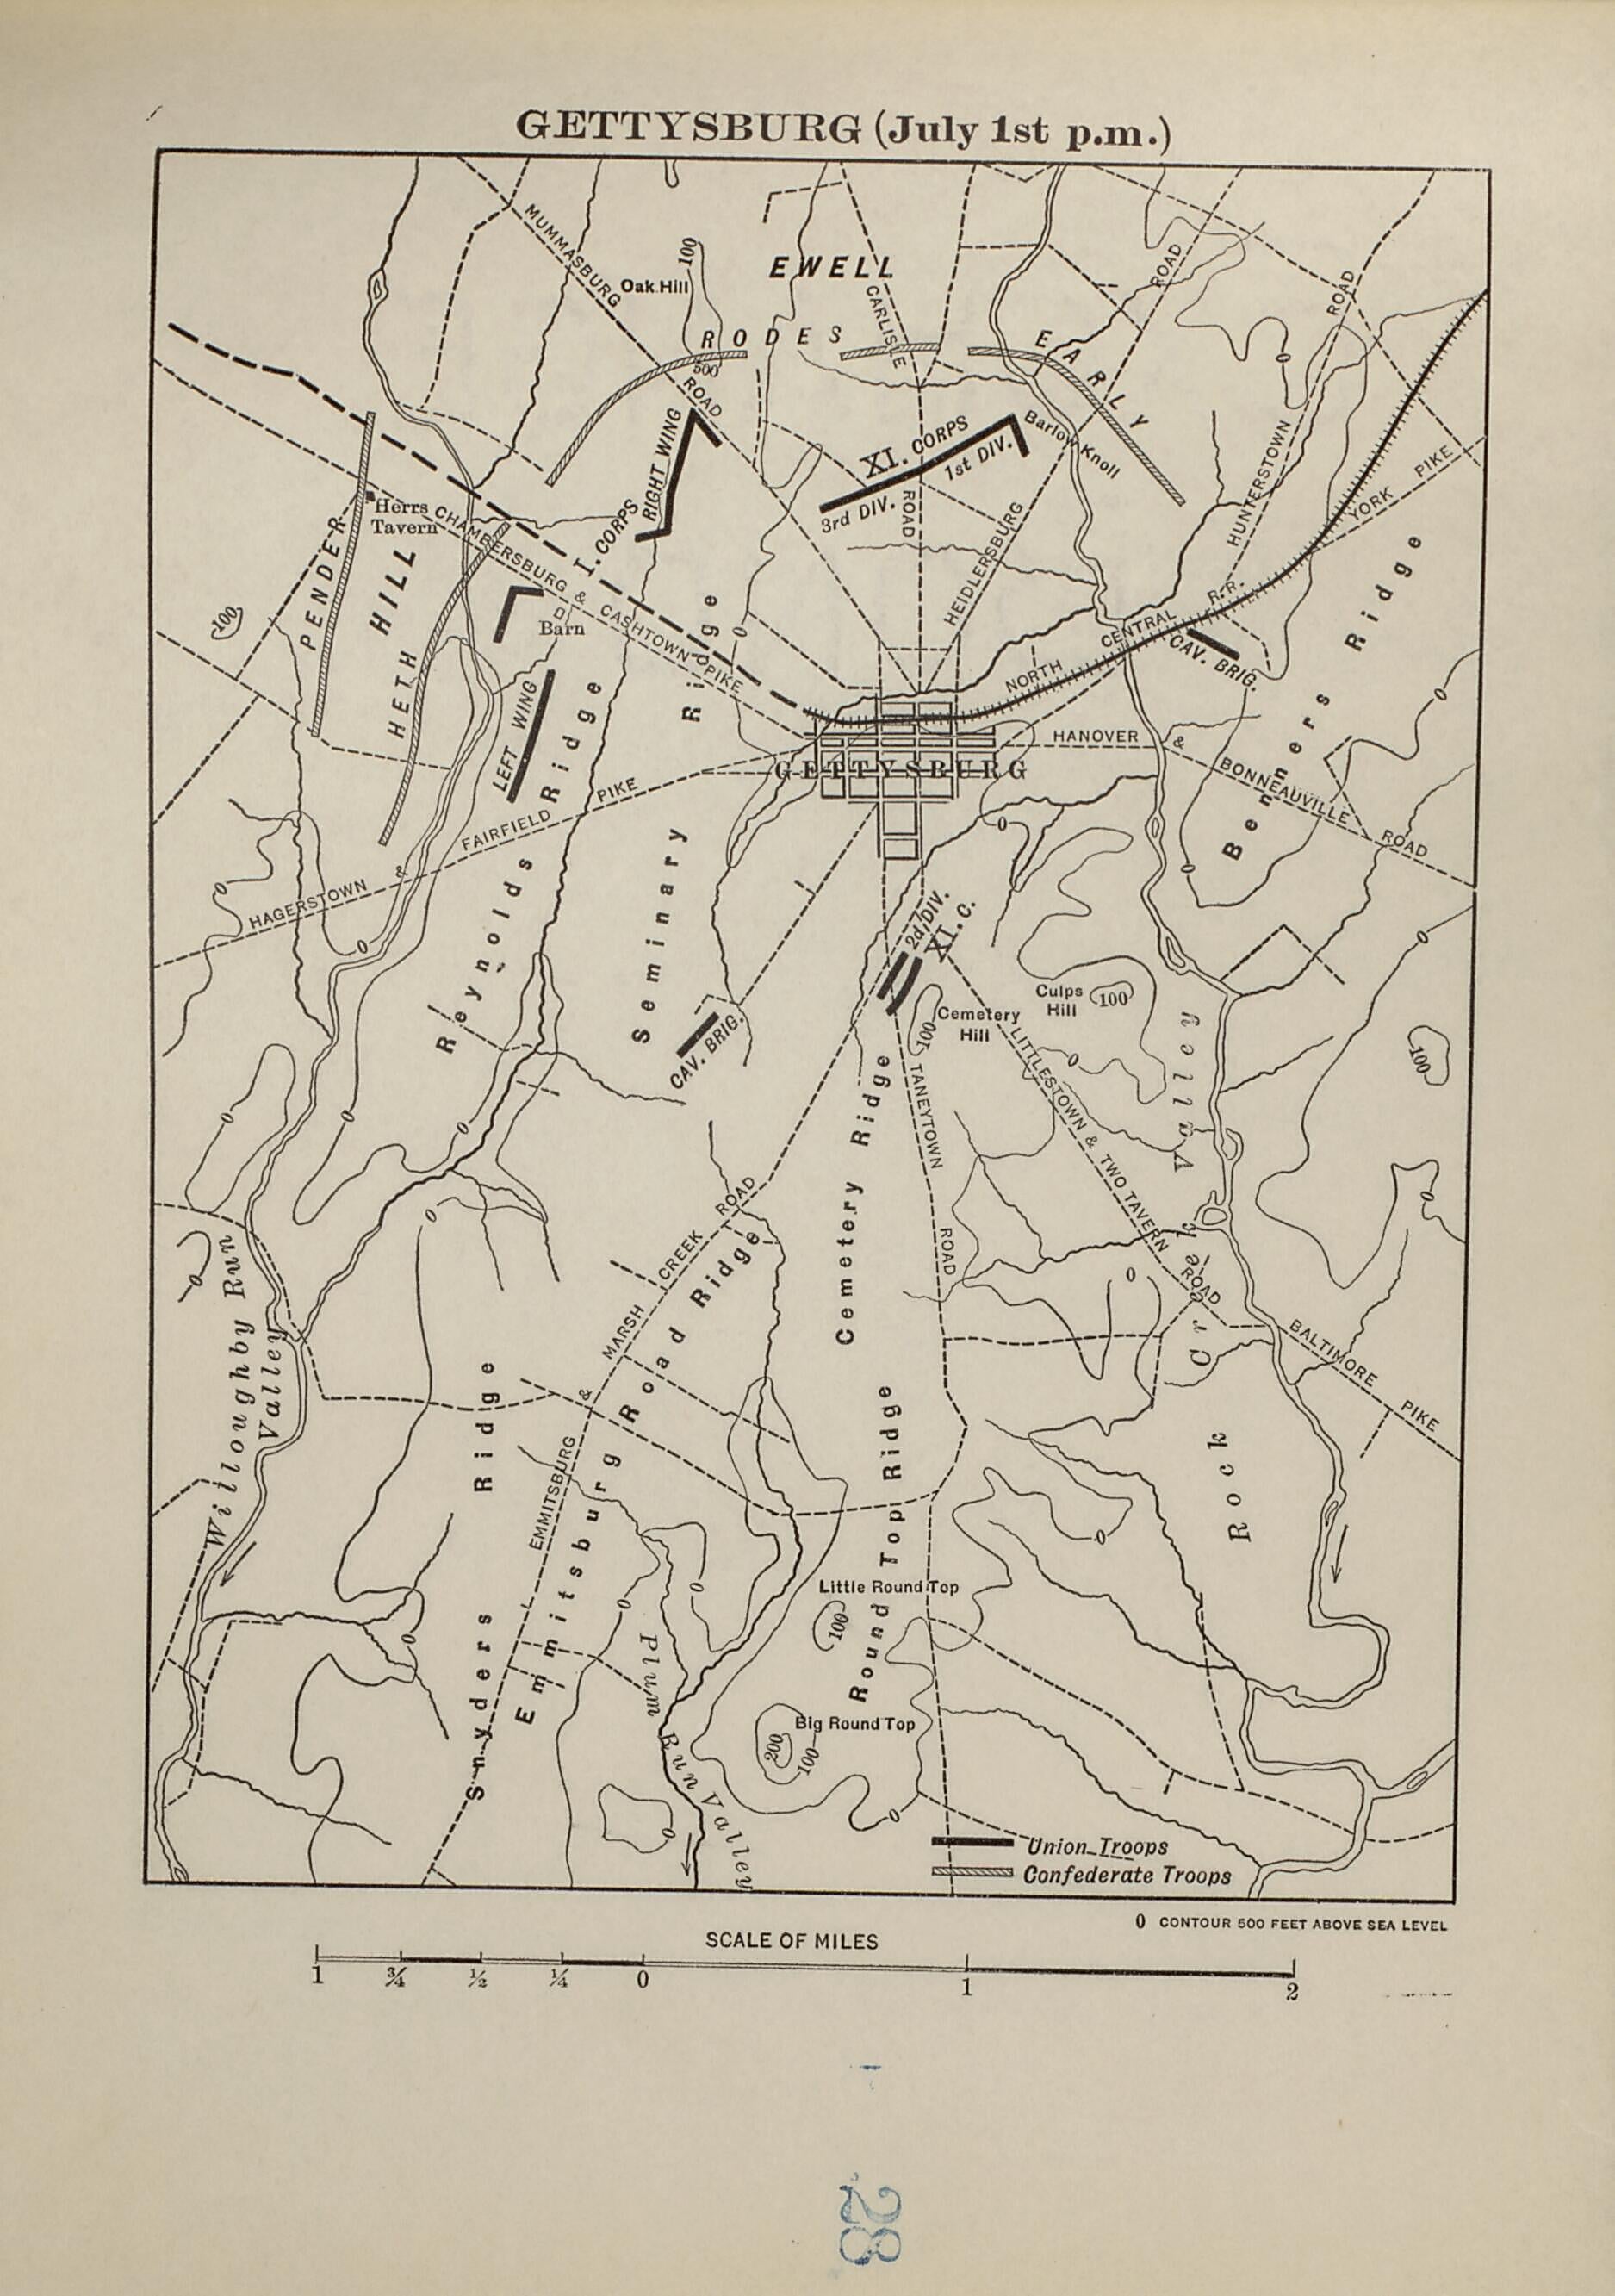 This old map of Gettysburg (July 1st P.m.) from American Civil War Atlas from 1914 was created by G. J. (Gustav Joseph) Fiebeger in 1914